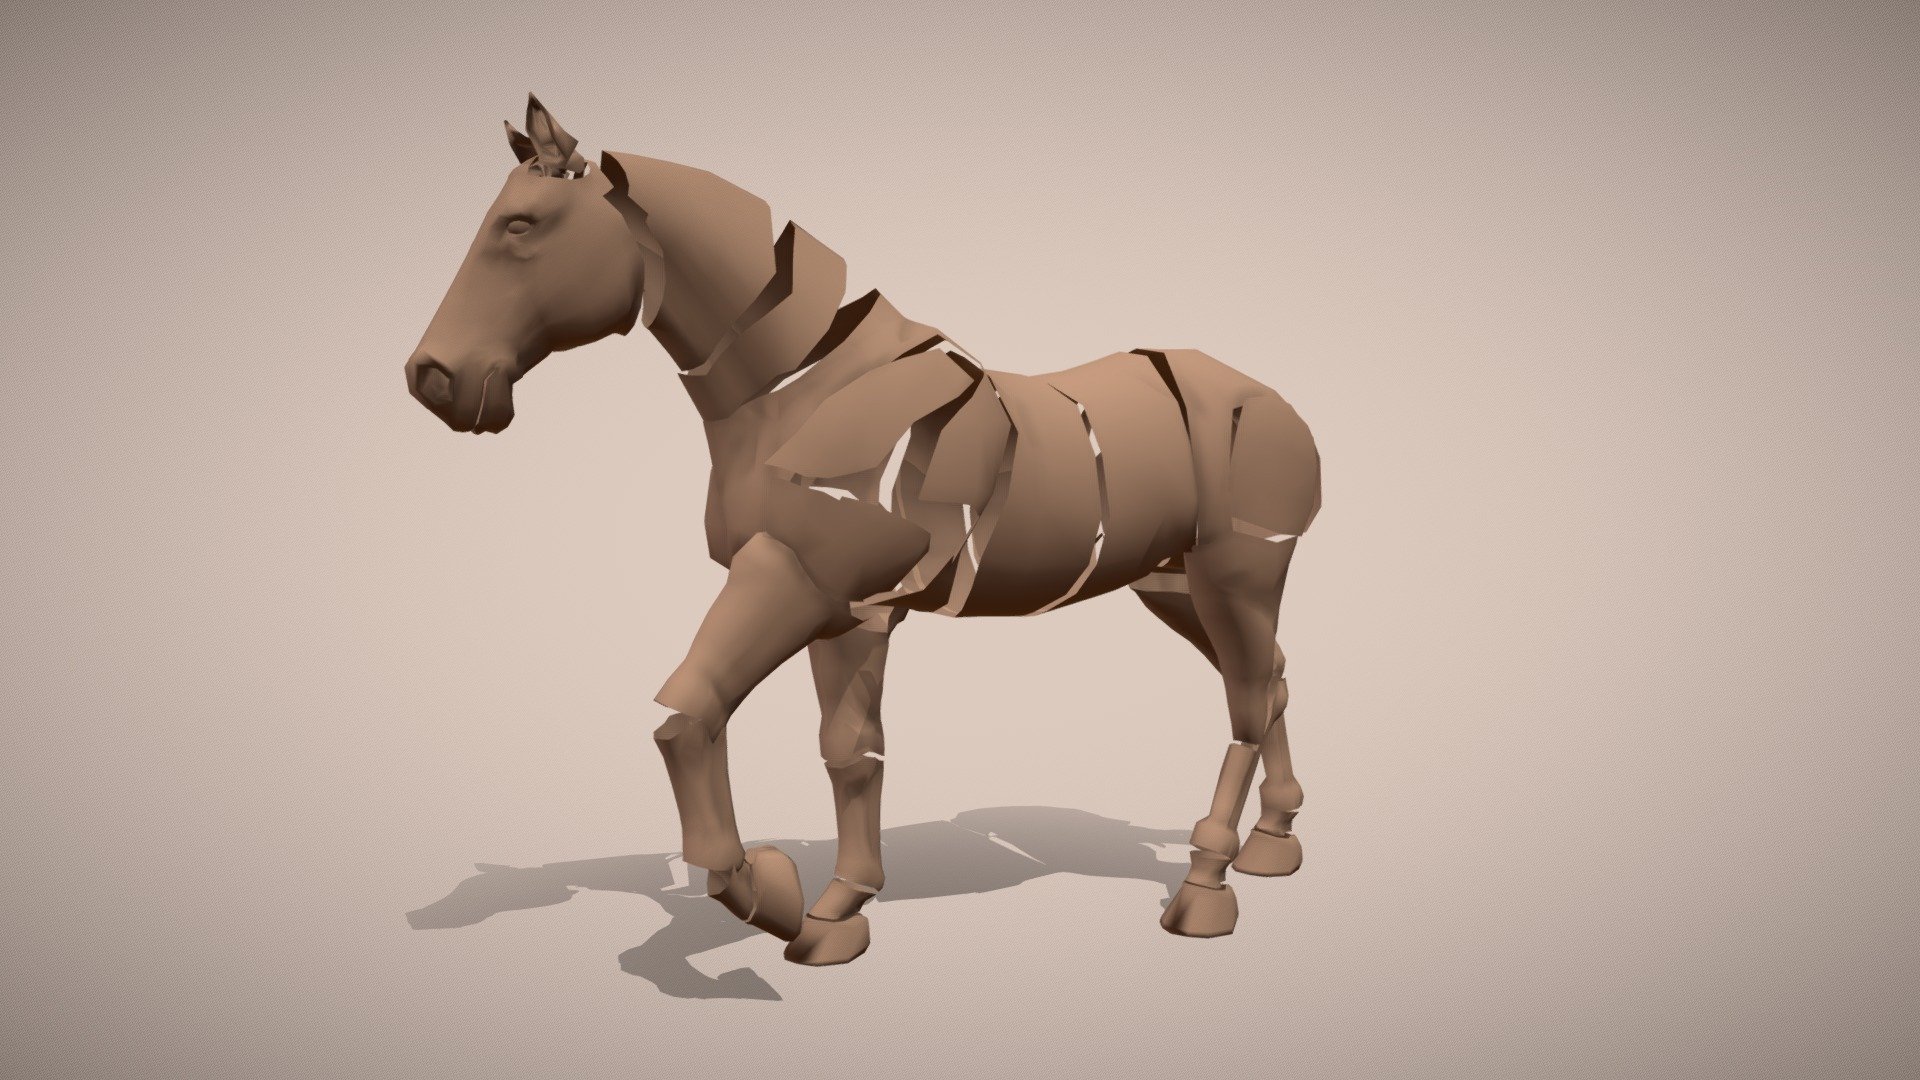 Animation Set of a Horse:
- Idle
- Walk
- Run

Animated for Portfolio 5 course at Full Sail University 3d model